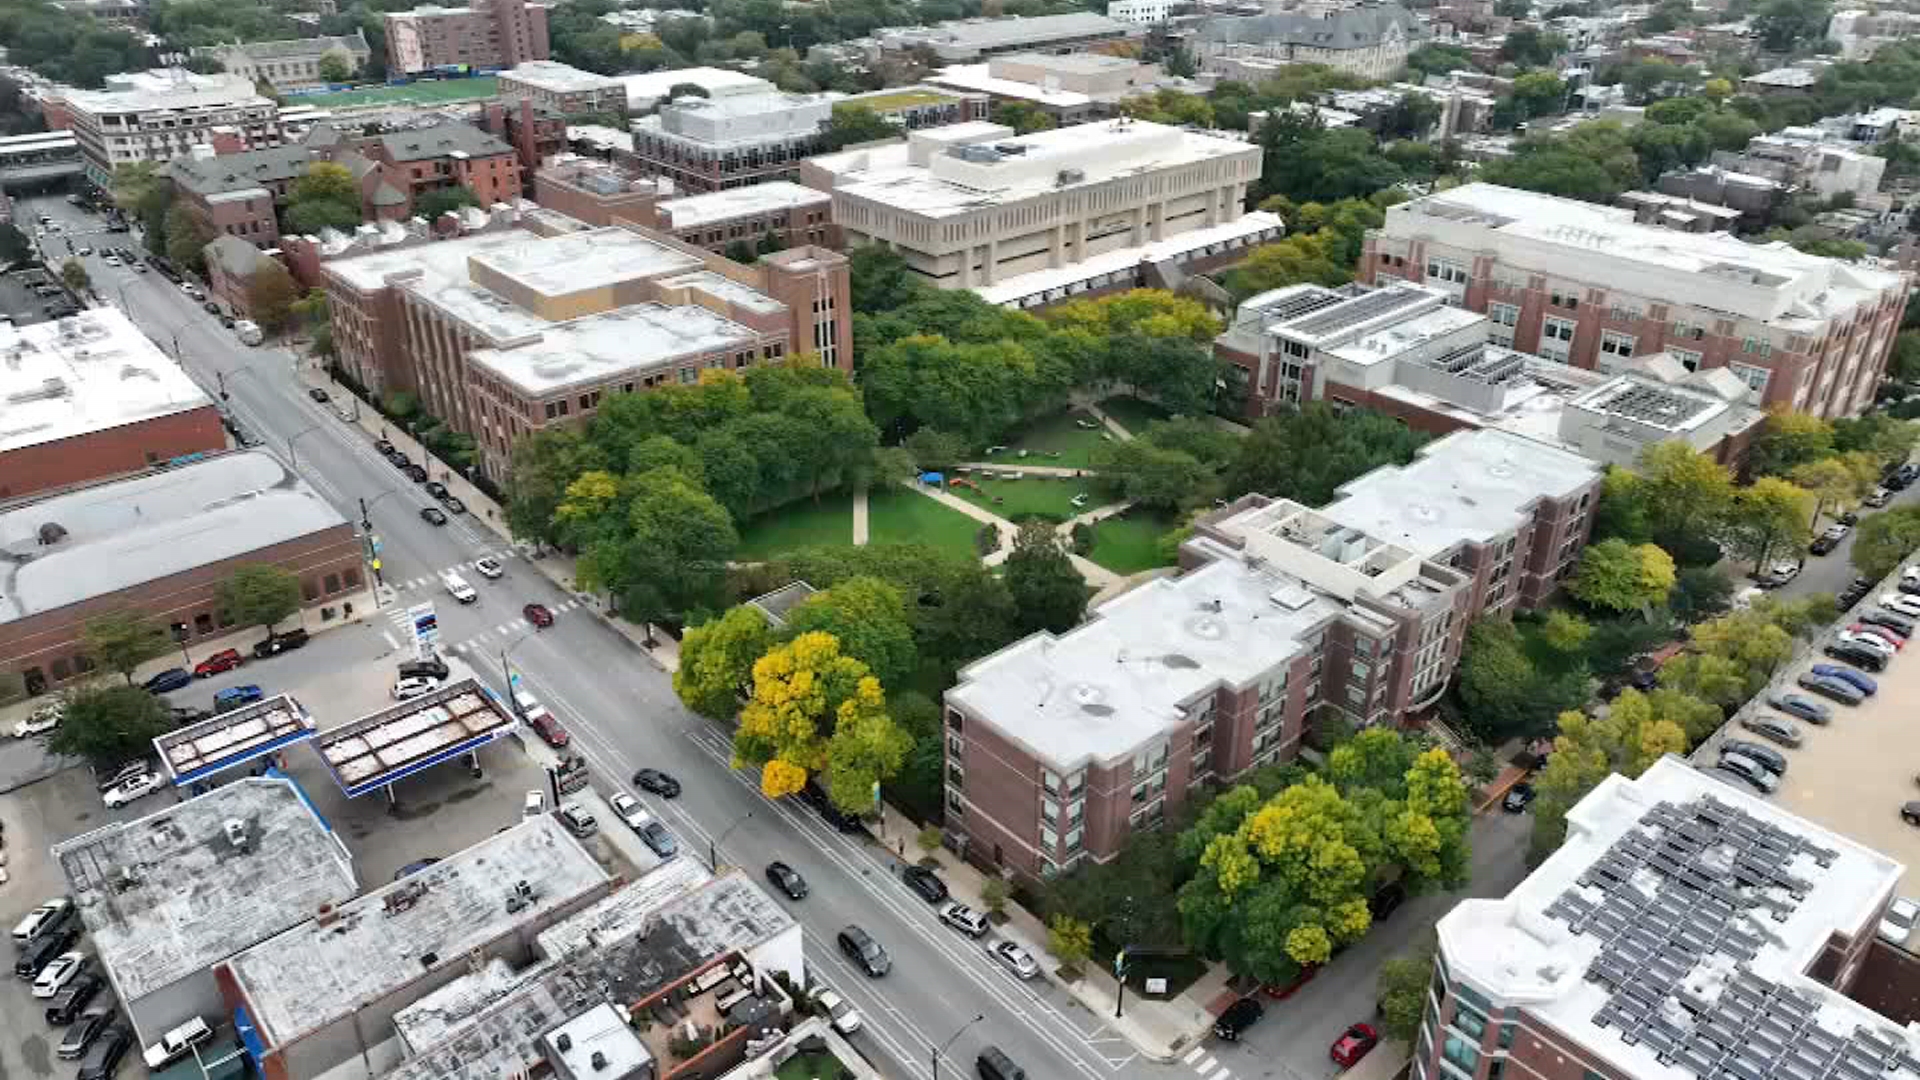 Lincoln Park Campus, Campuses, About, DePaul University